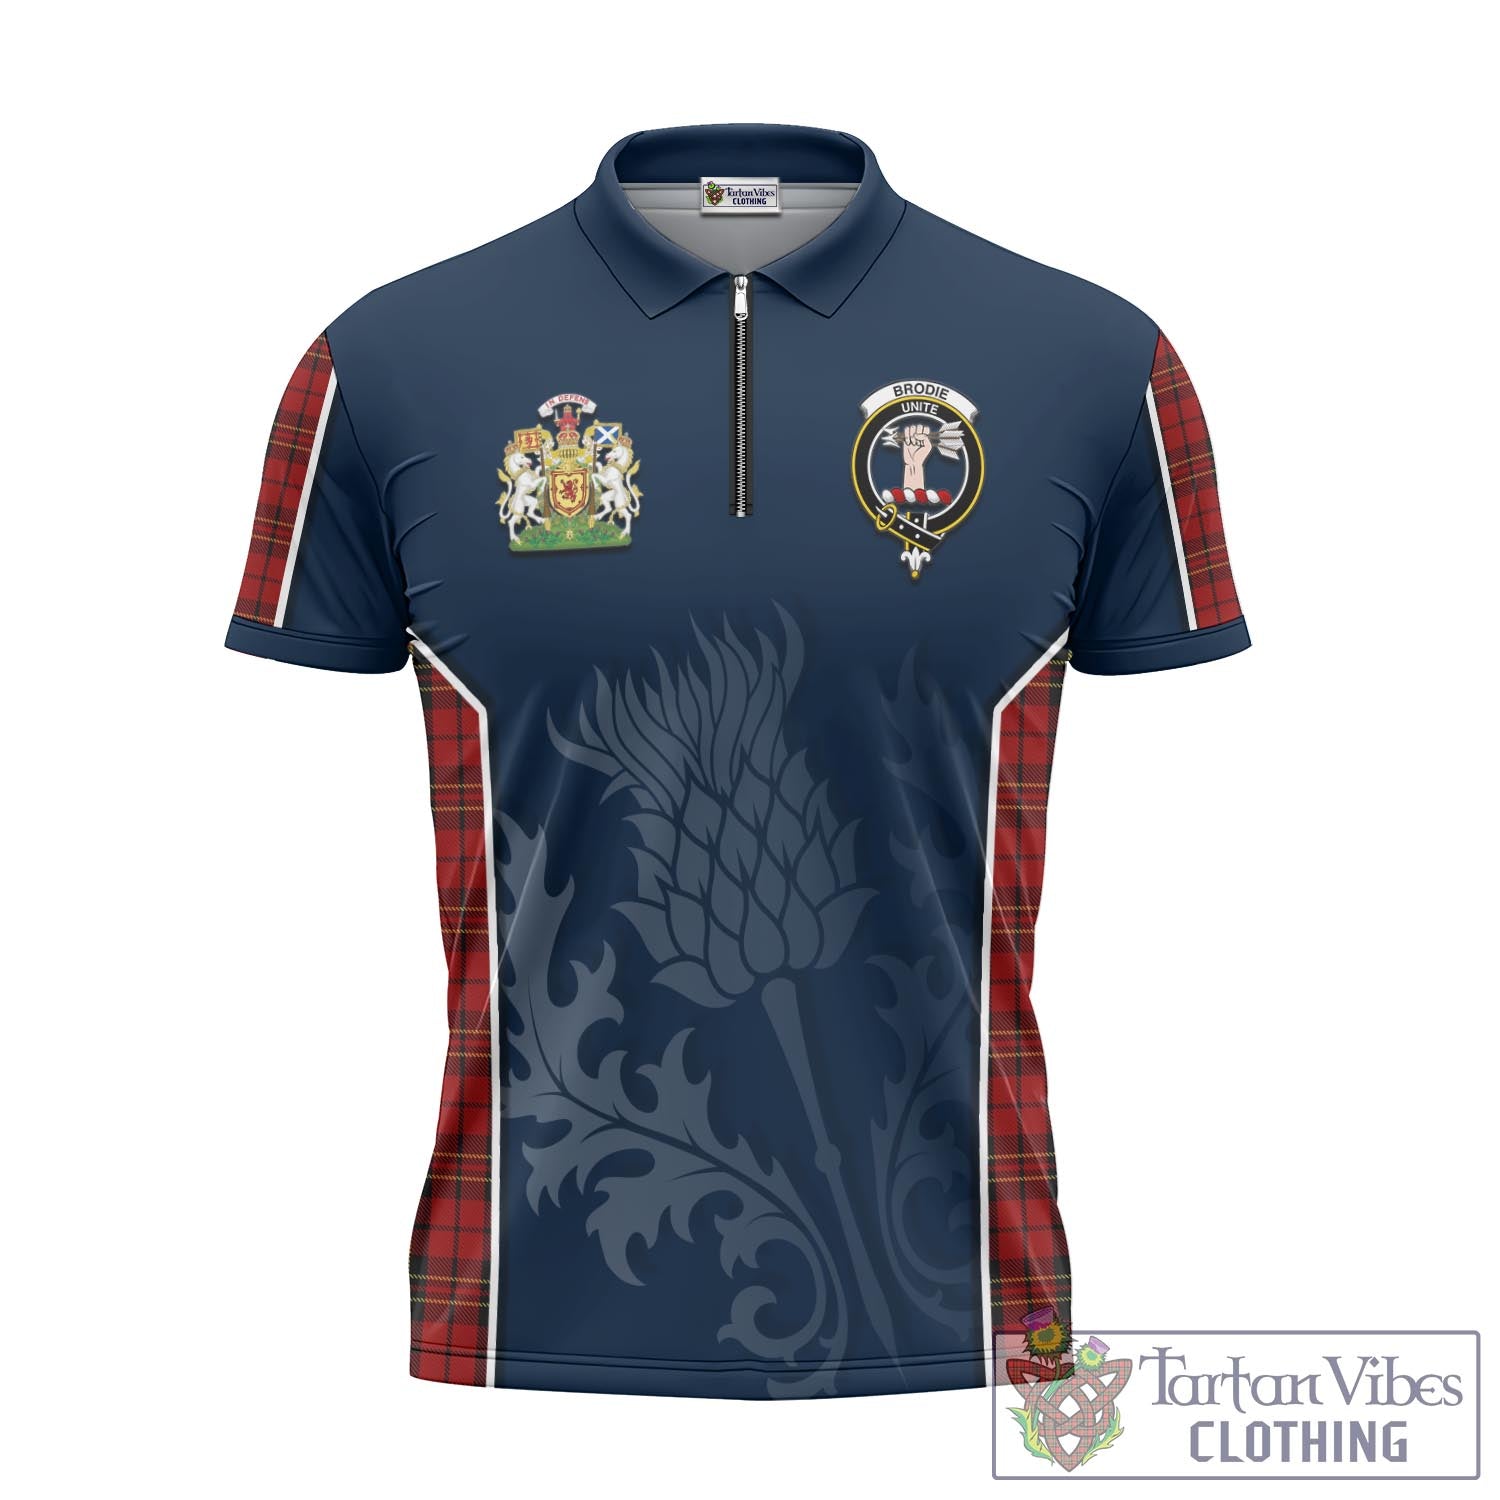 Tartan Vibes Clothing Brodie Tartan Zipper Polo Shirt with Family Crest and Scottish Thistle Vibes Sport Style